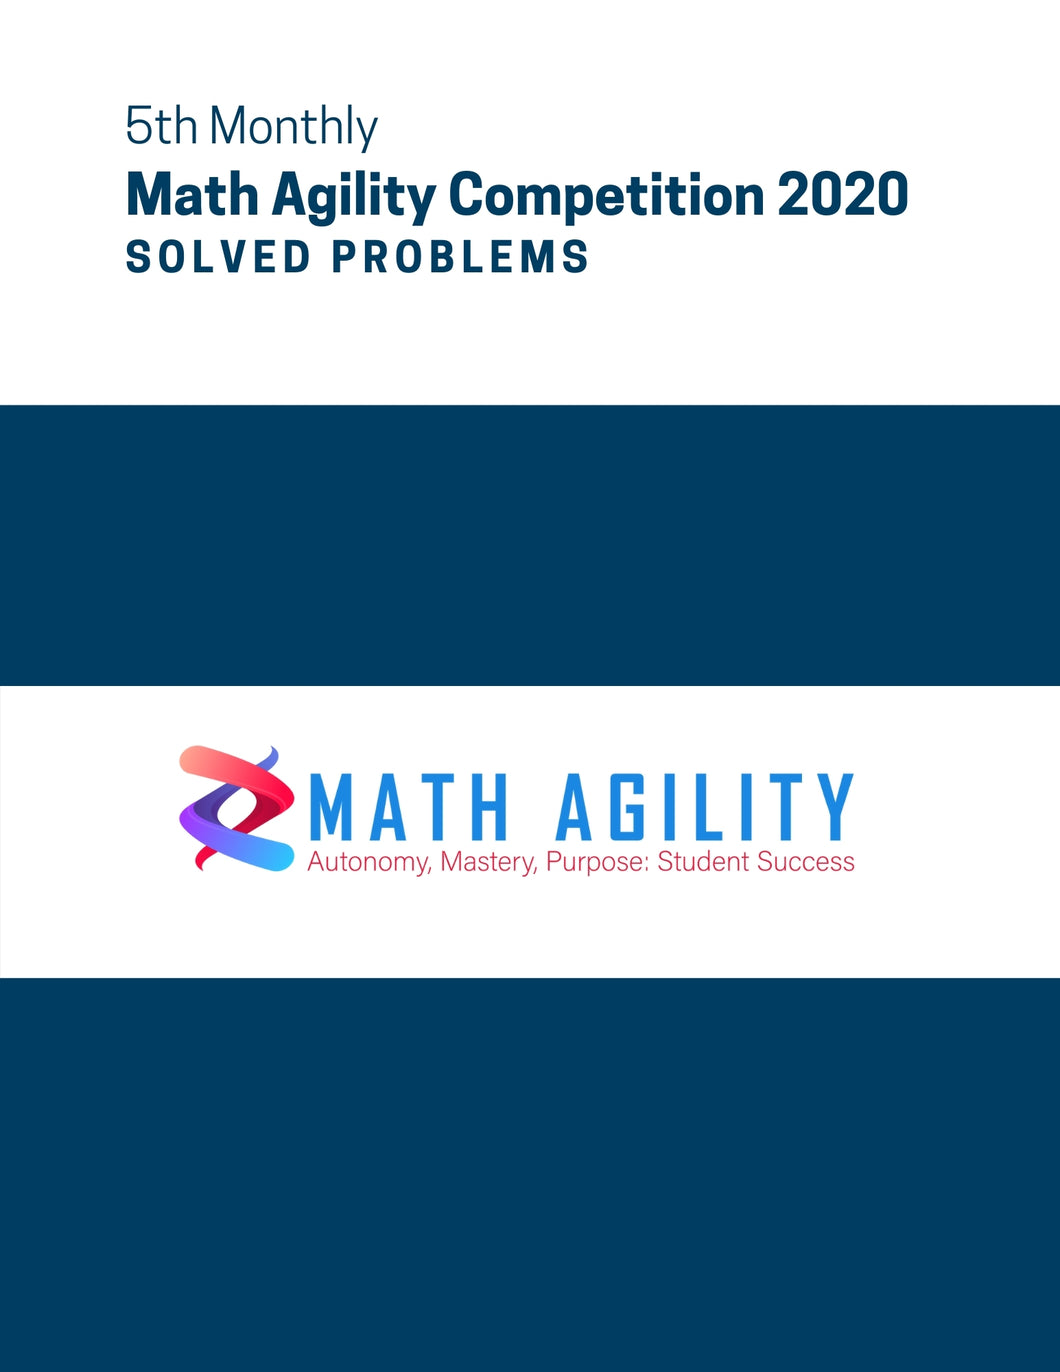 5th Math Agility Competition 2020 Solved Problems